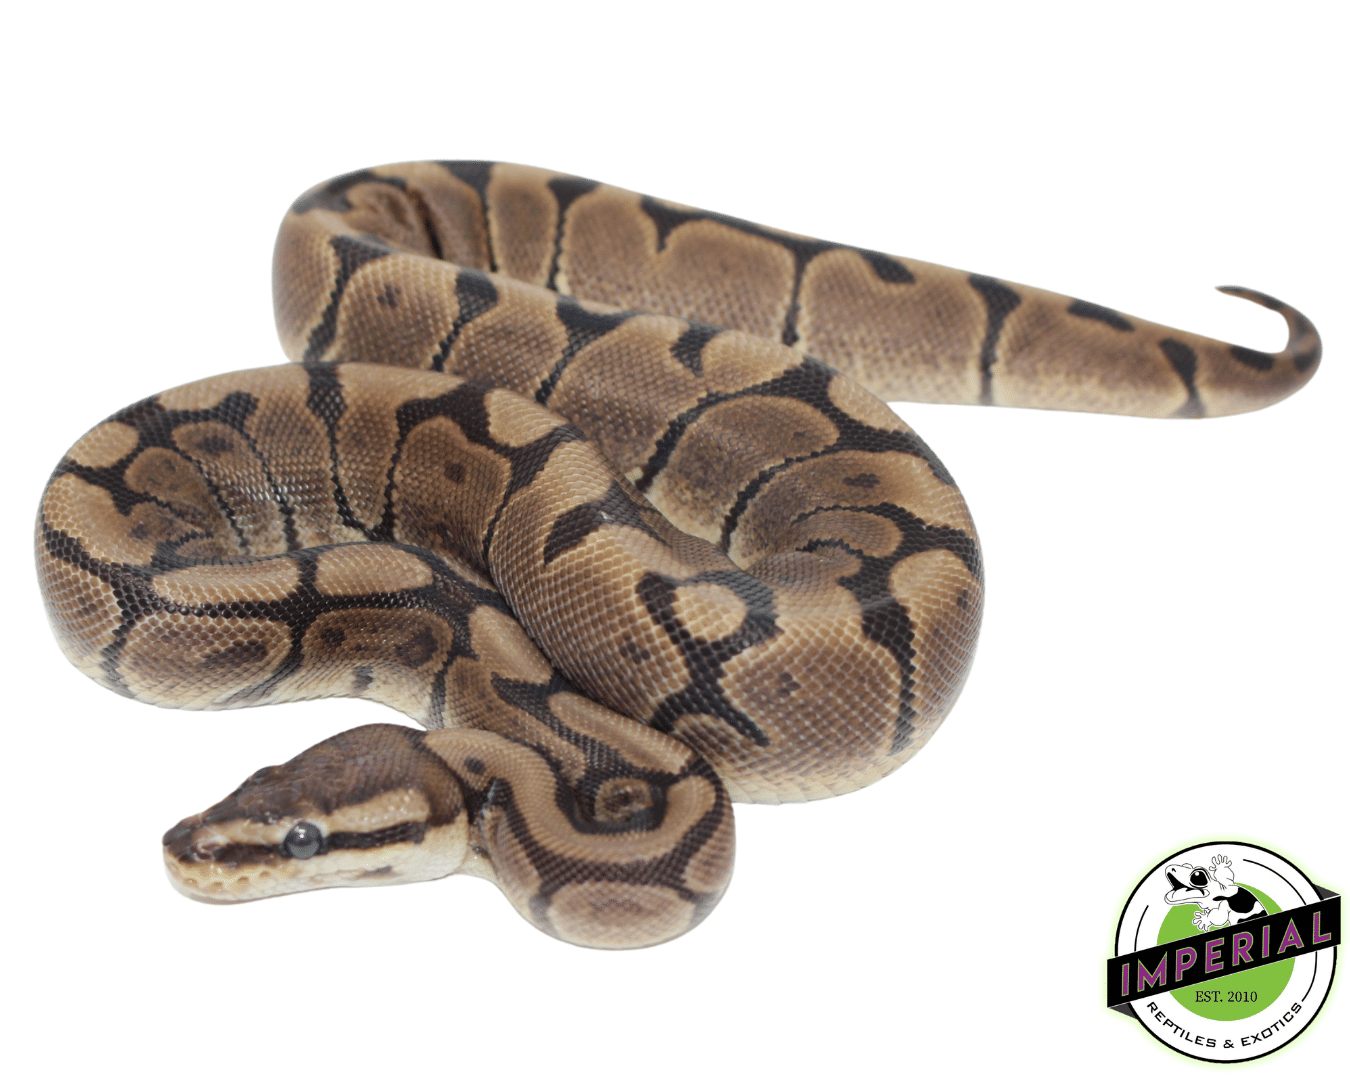 woma ball python for sale, buy reptiles online